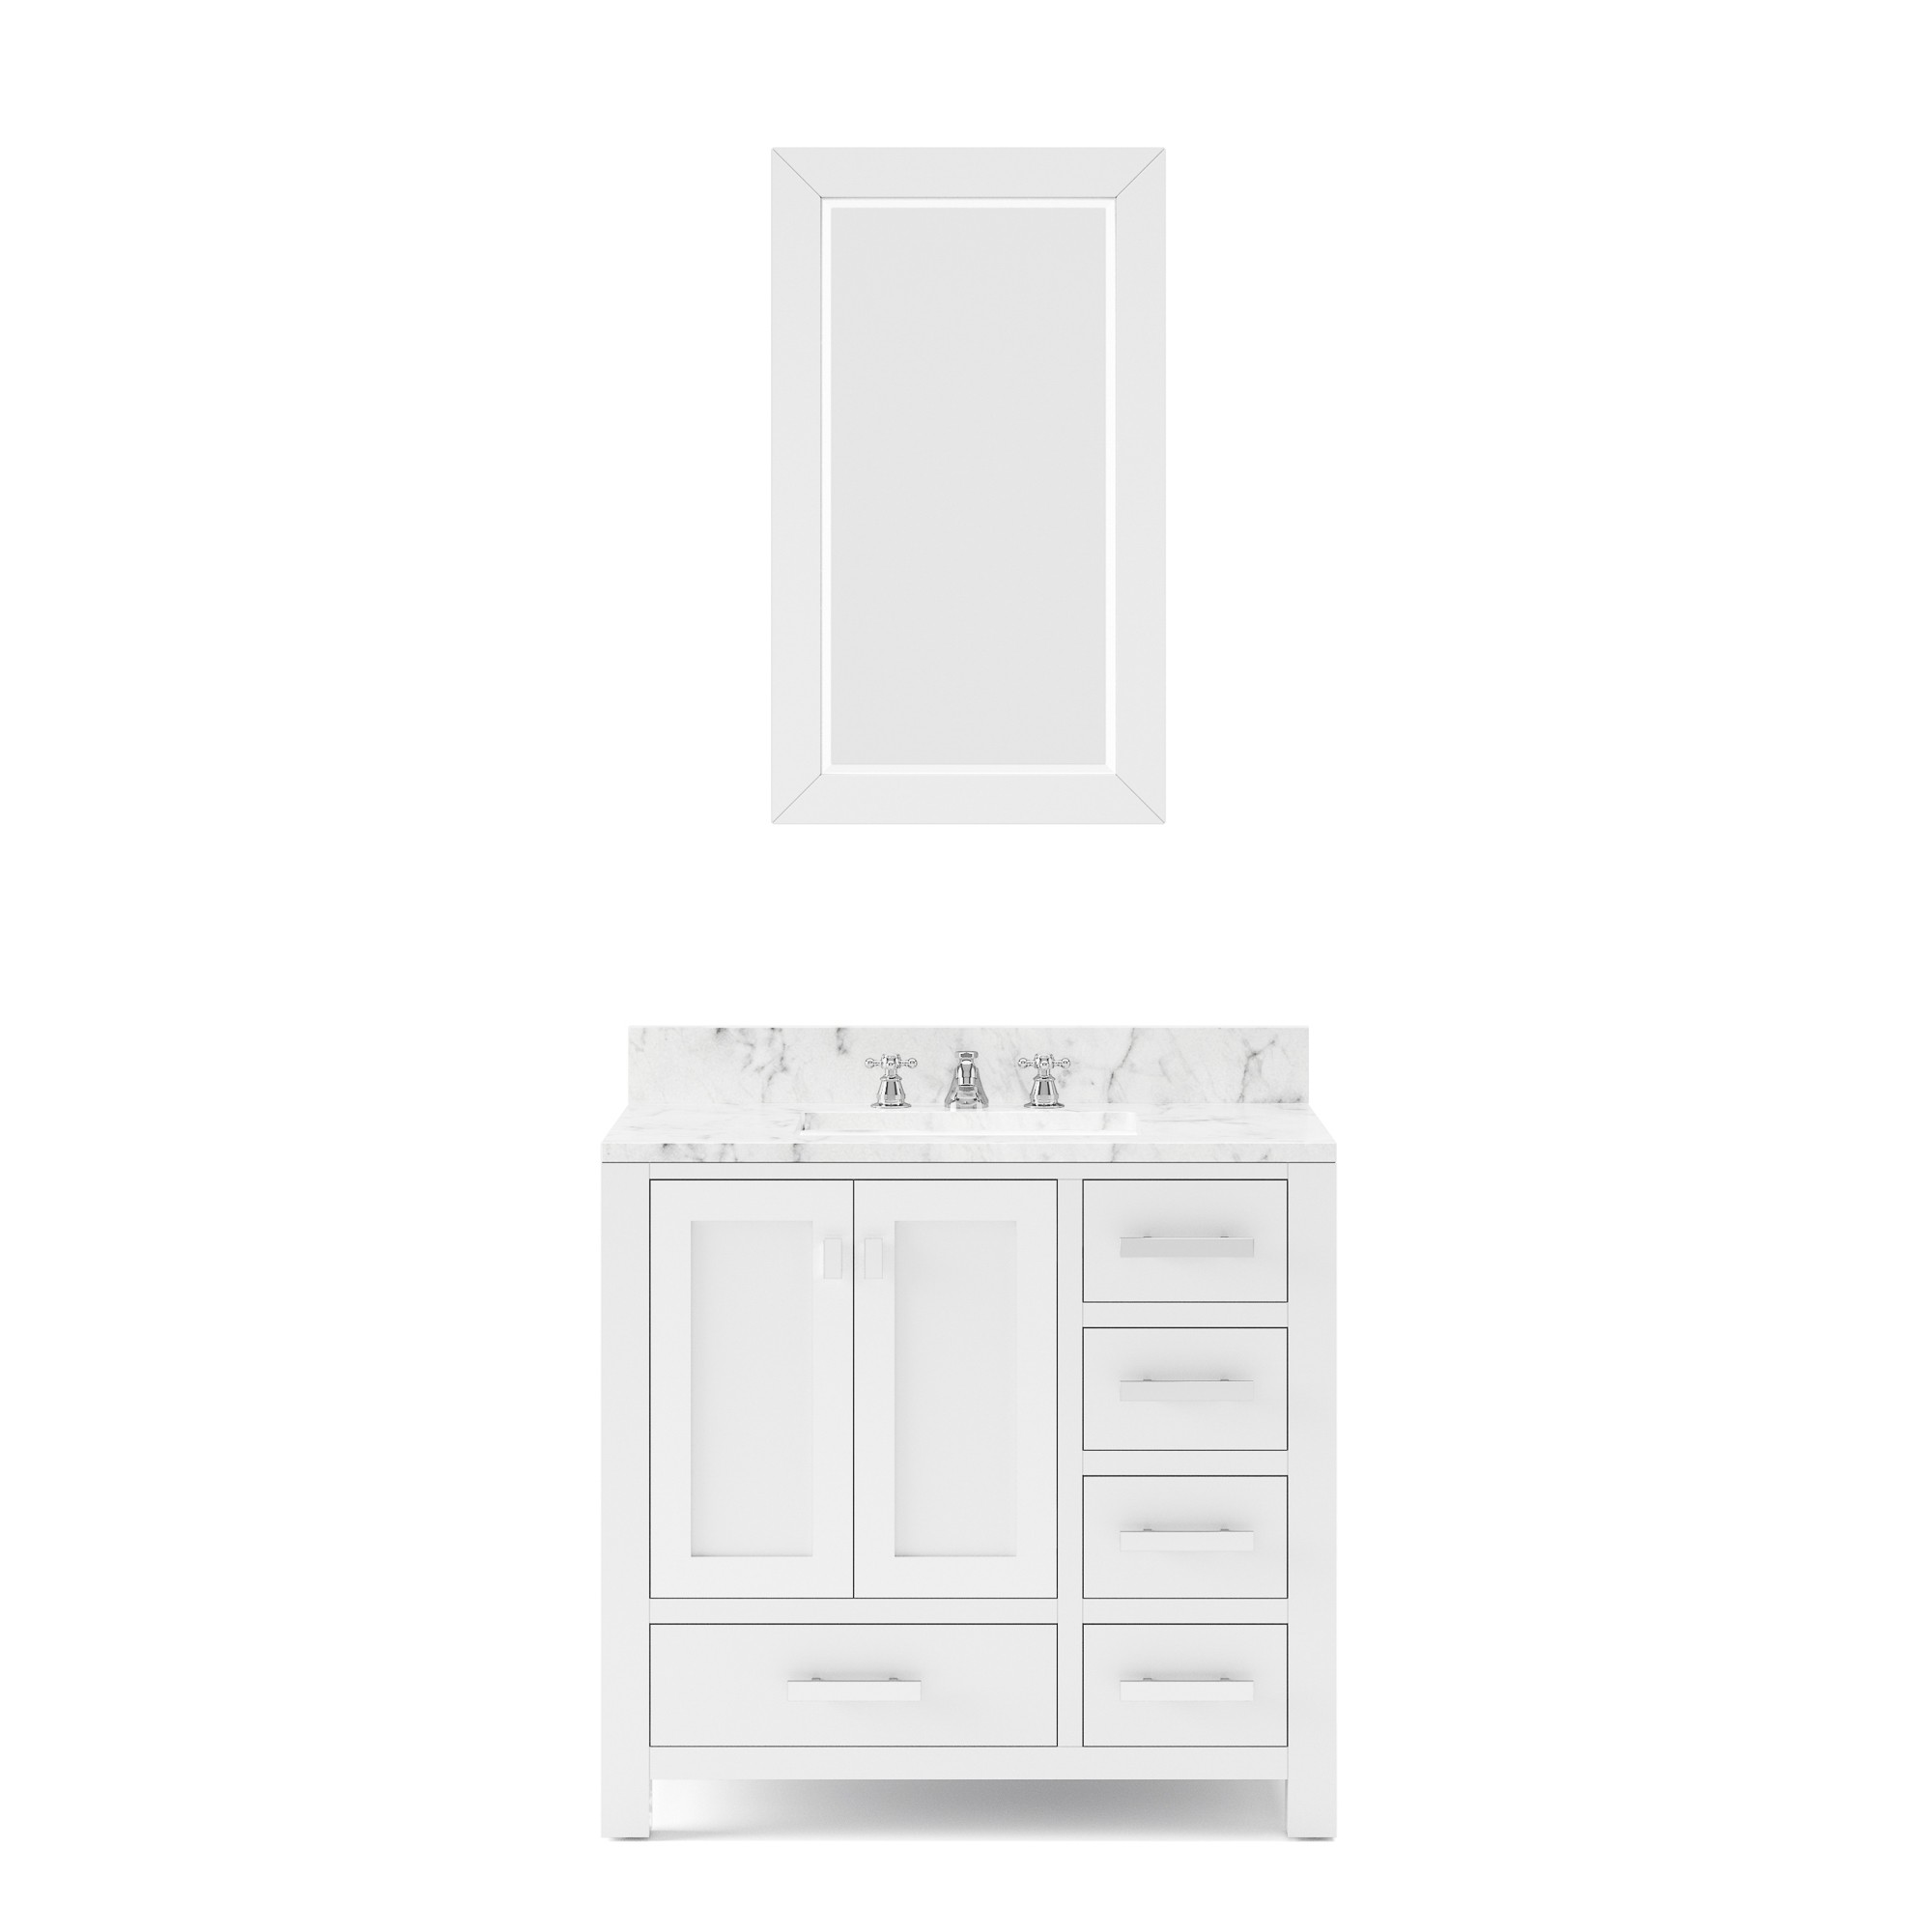 WATER-CREATION MS36CW01PW-R24BX0901 MADISON 36 PURE WHITE SINGLE SINK BATHROOM VANITY WITH MATCHING MIRROR AND FAUCET